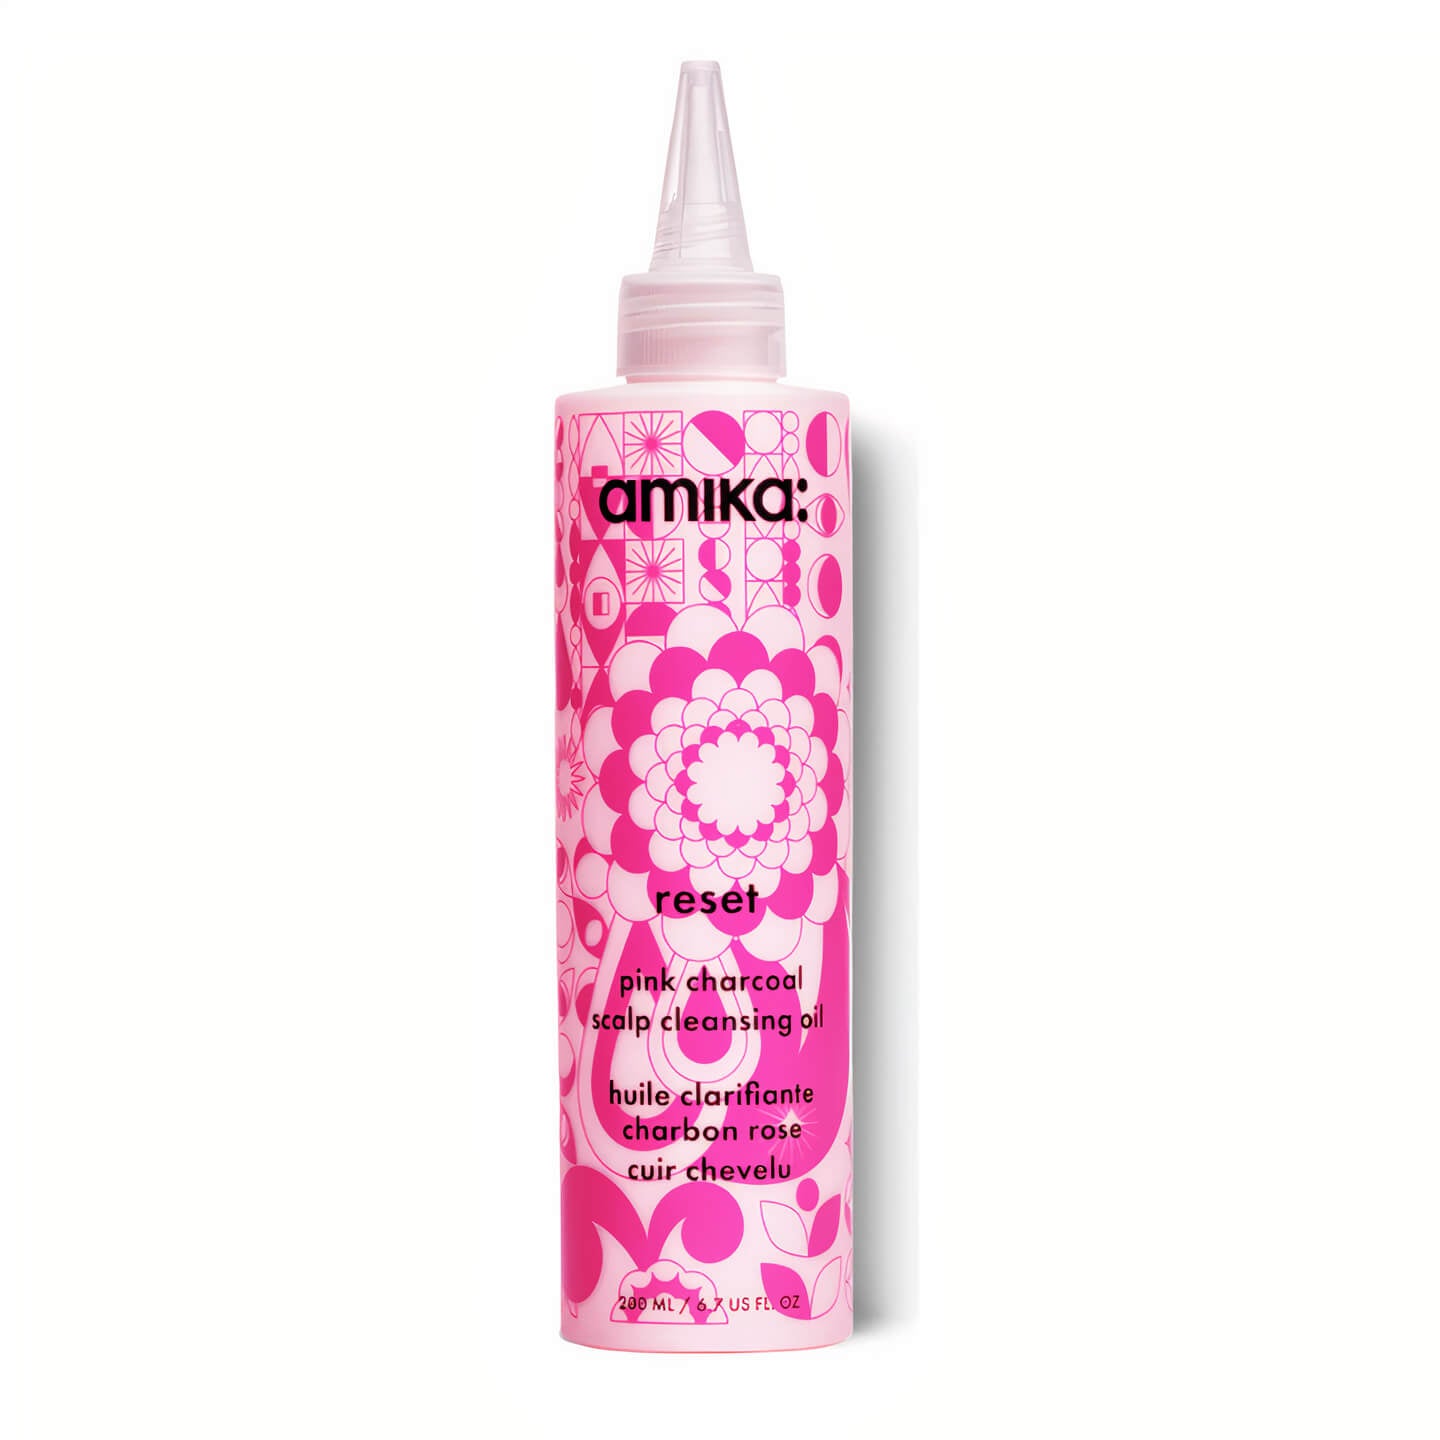 Amika: Reset Pink Charcoal Scalp Cleansing Oil